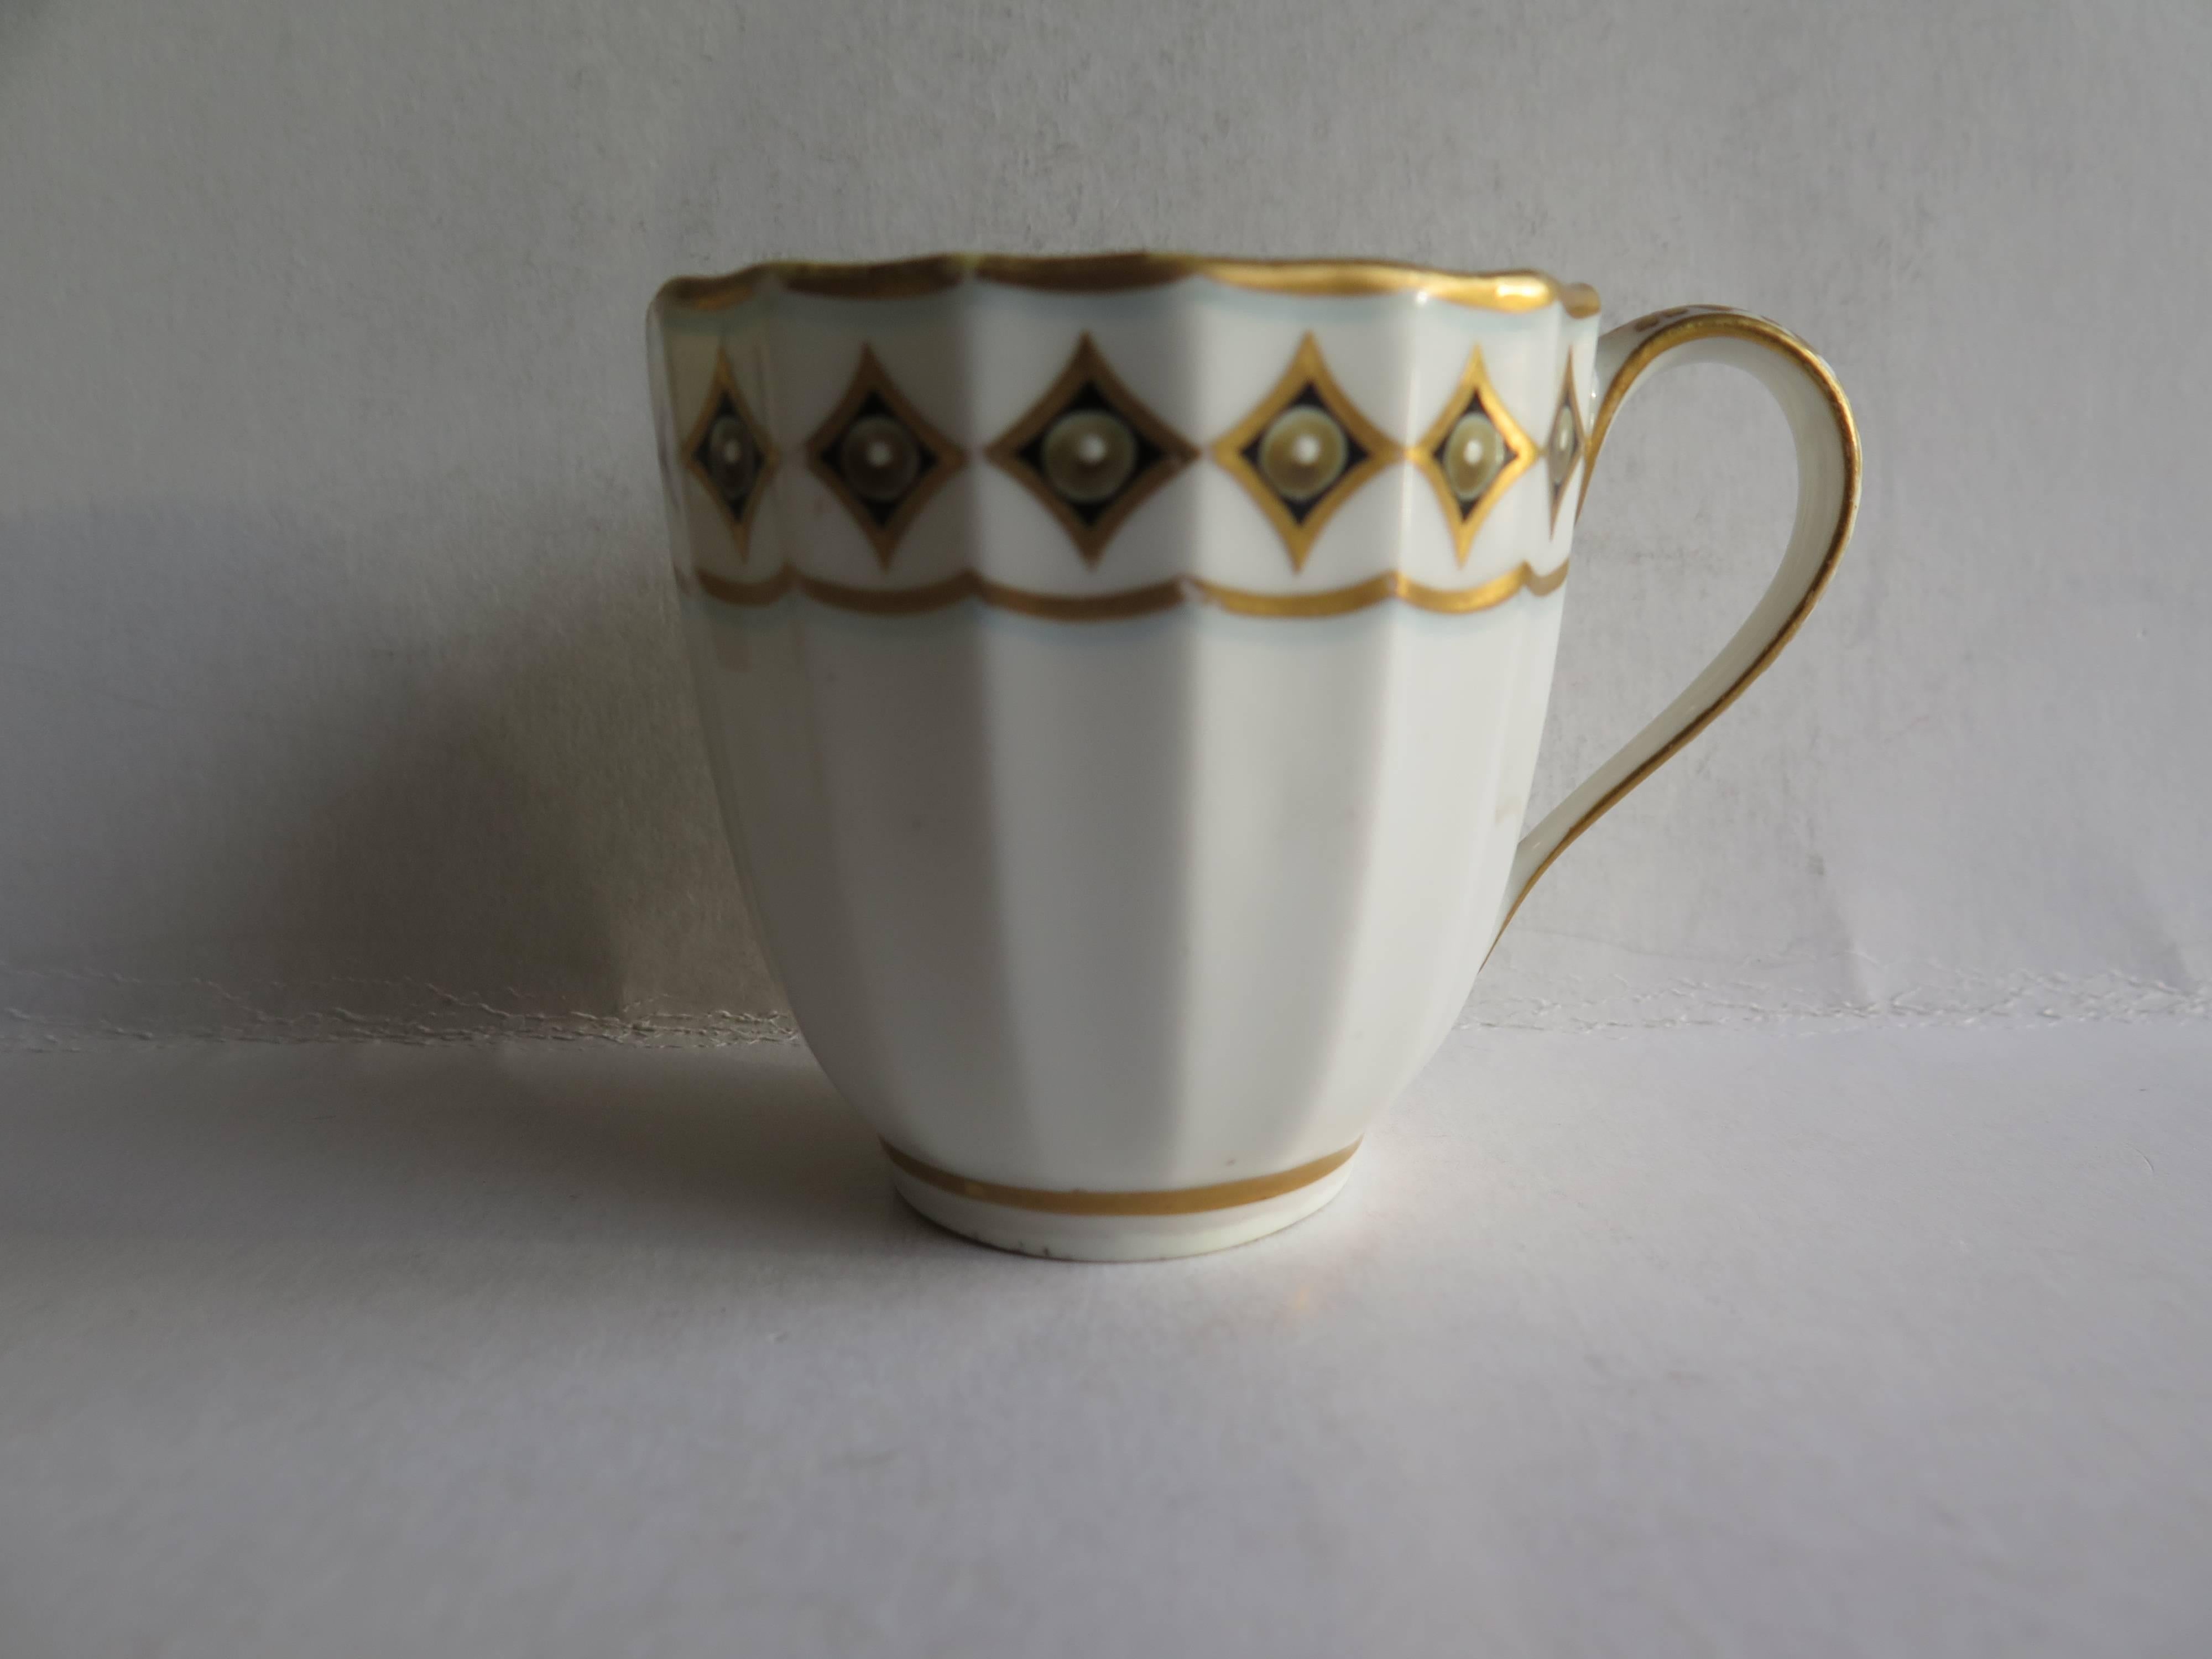 This is a very good early coffee cup by the Derby factory, made in the late 18th century, George 3rd period, circa 1790.

The body of the cup has 16 vertical flutes and has a plain loop handle.

It is decorated with gilt rims with the outer rim